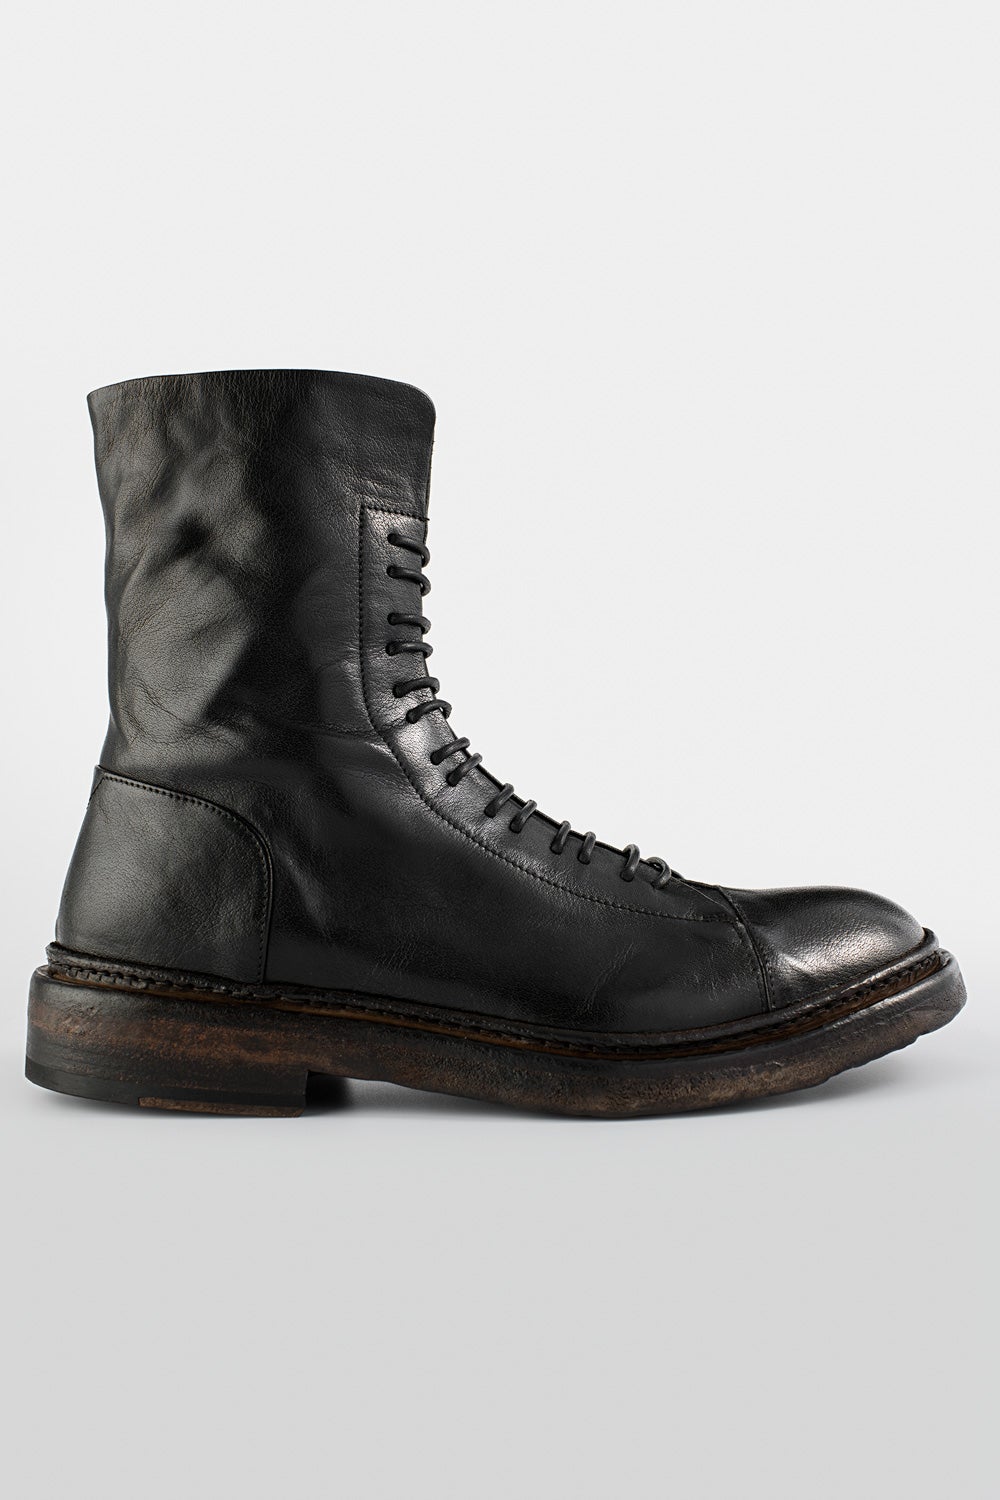 mens distressed leather boots